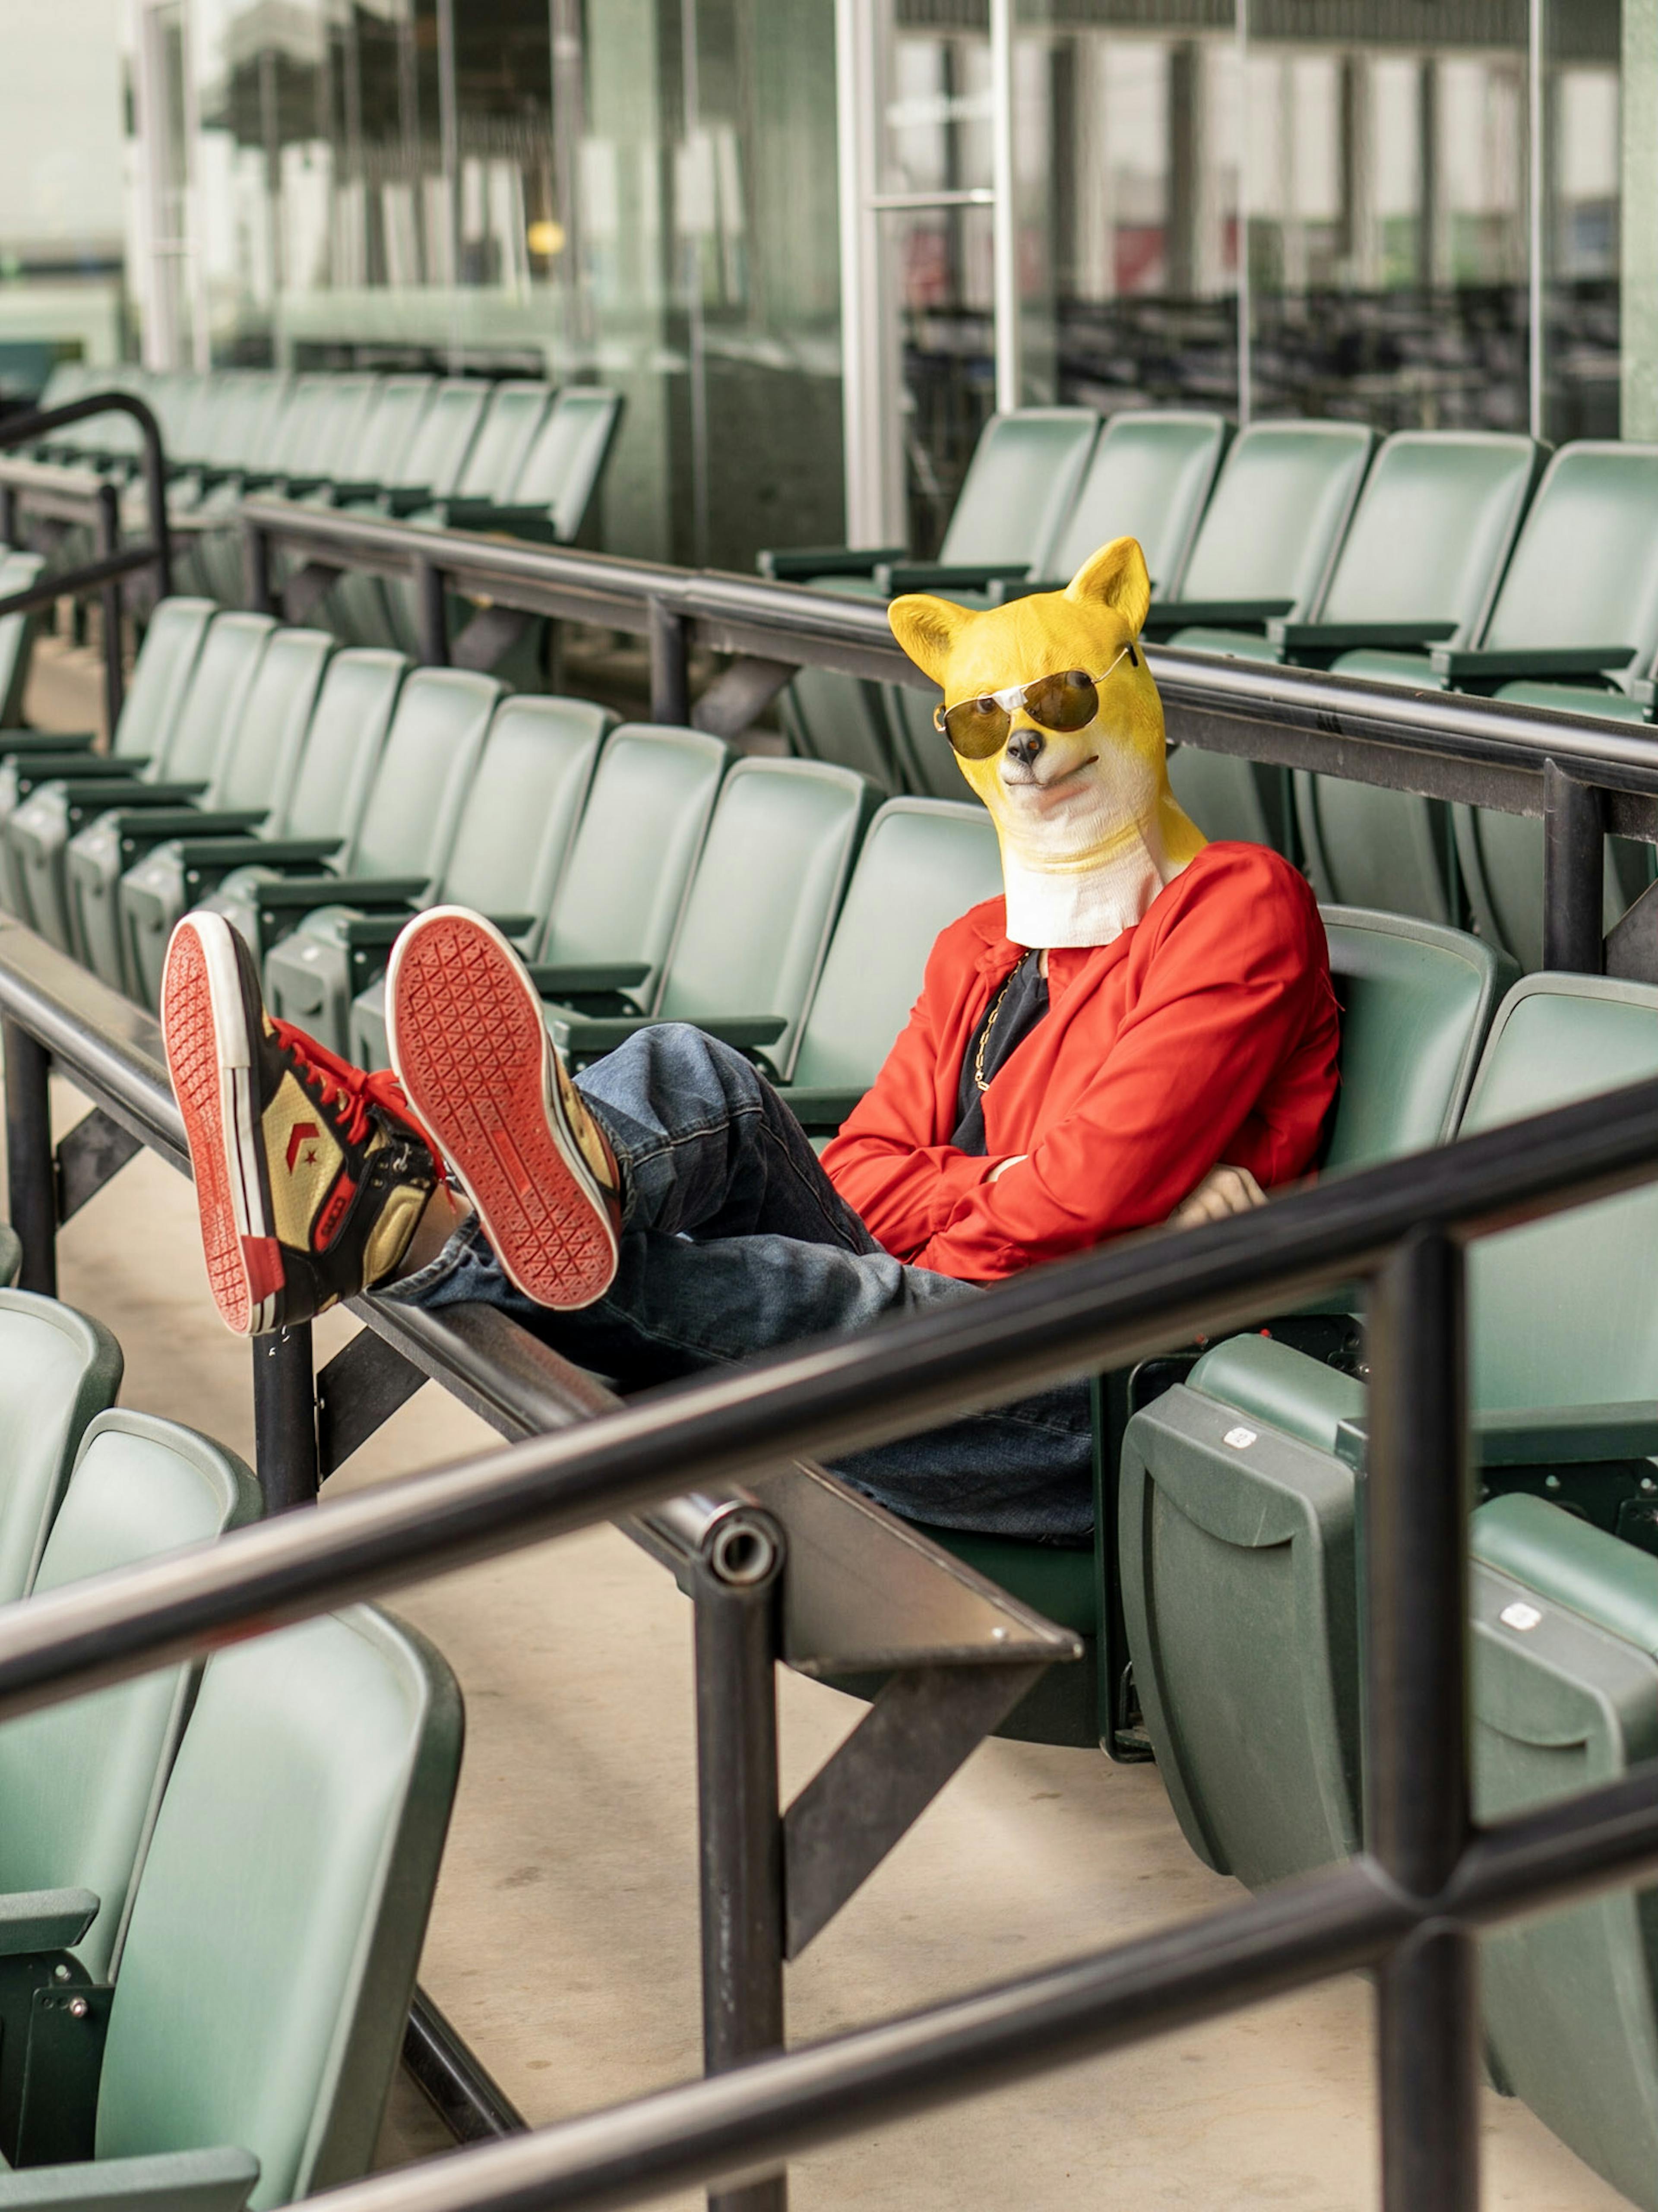 Rito Rhymes posted on the bleachers with a doge mask on